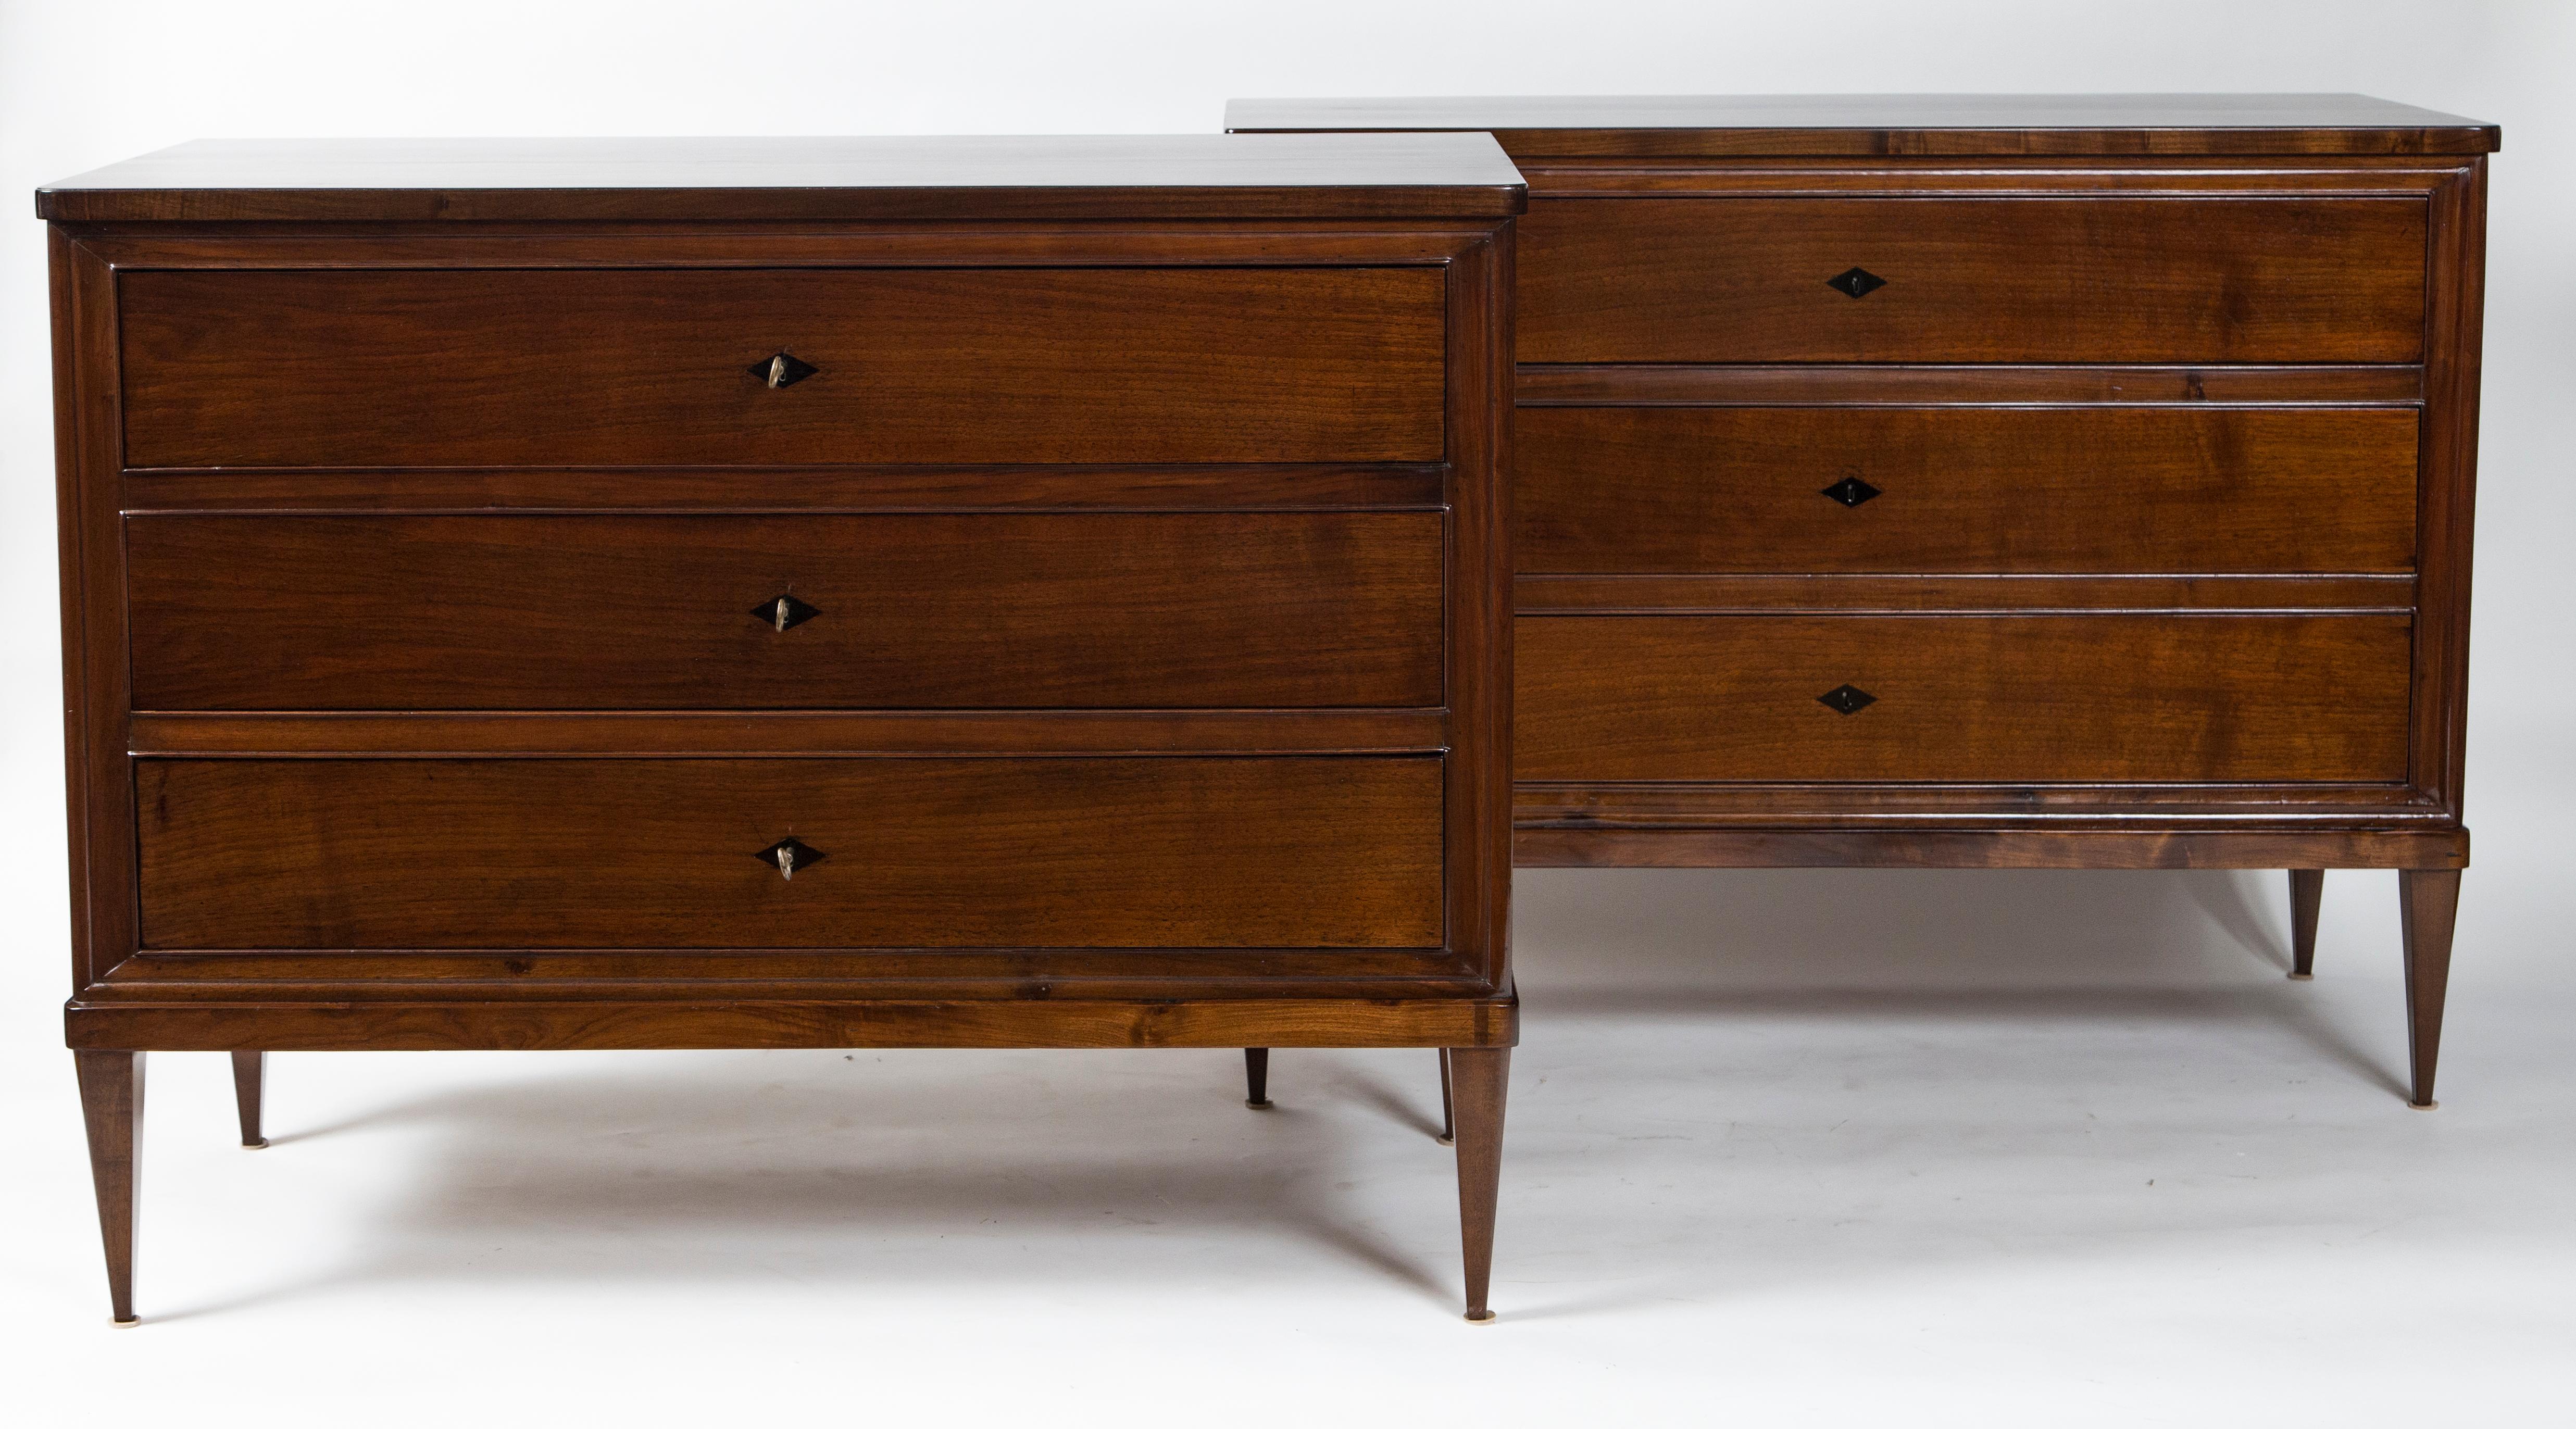 Pair of sleek Italian chests comprised of three drawers finishing on straight and tapered legs in a dark stained solid walnut wood, adorned with darker stained inlaid diamond-shaped escutcheons, a working key for each drawer is provided
Origin: